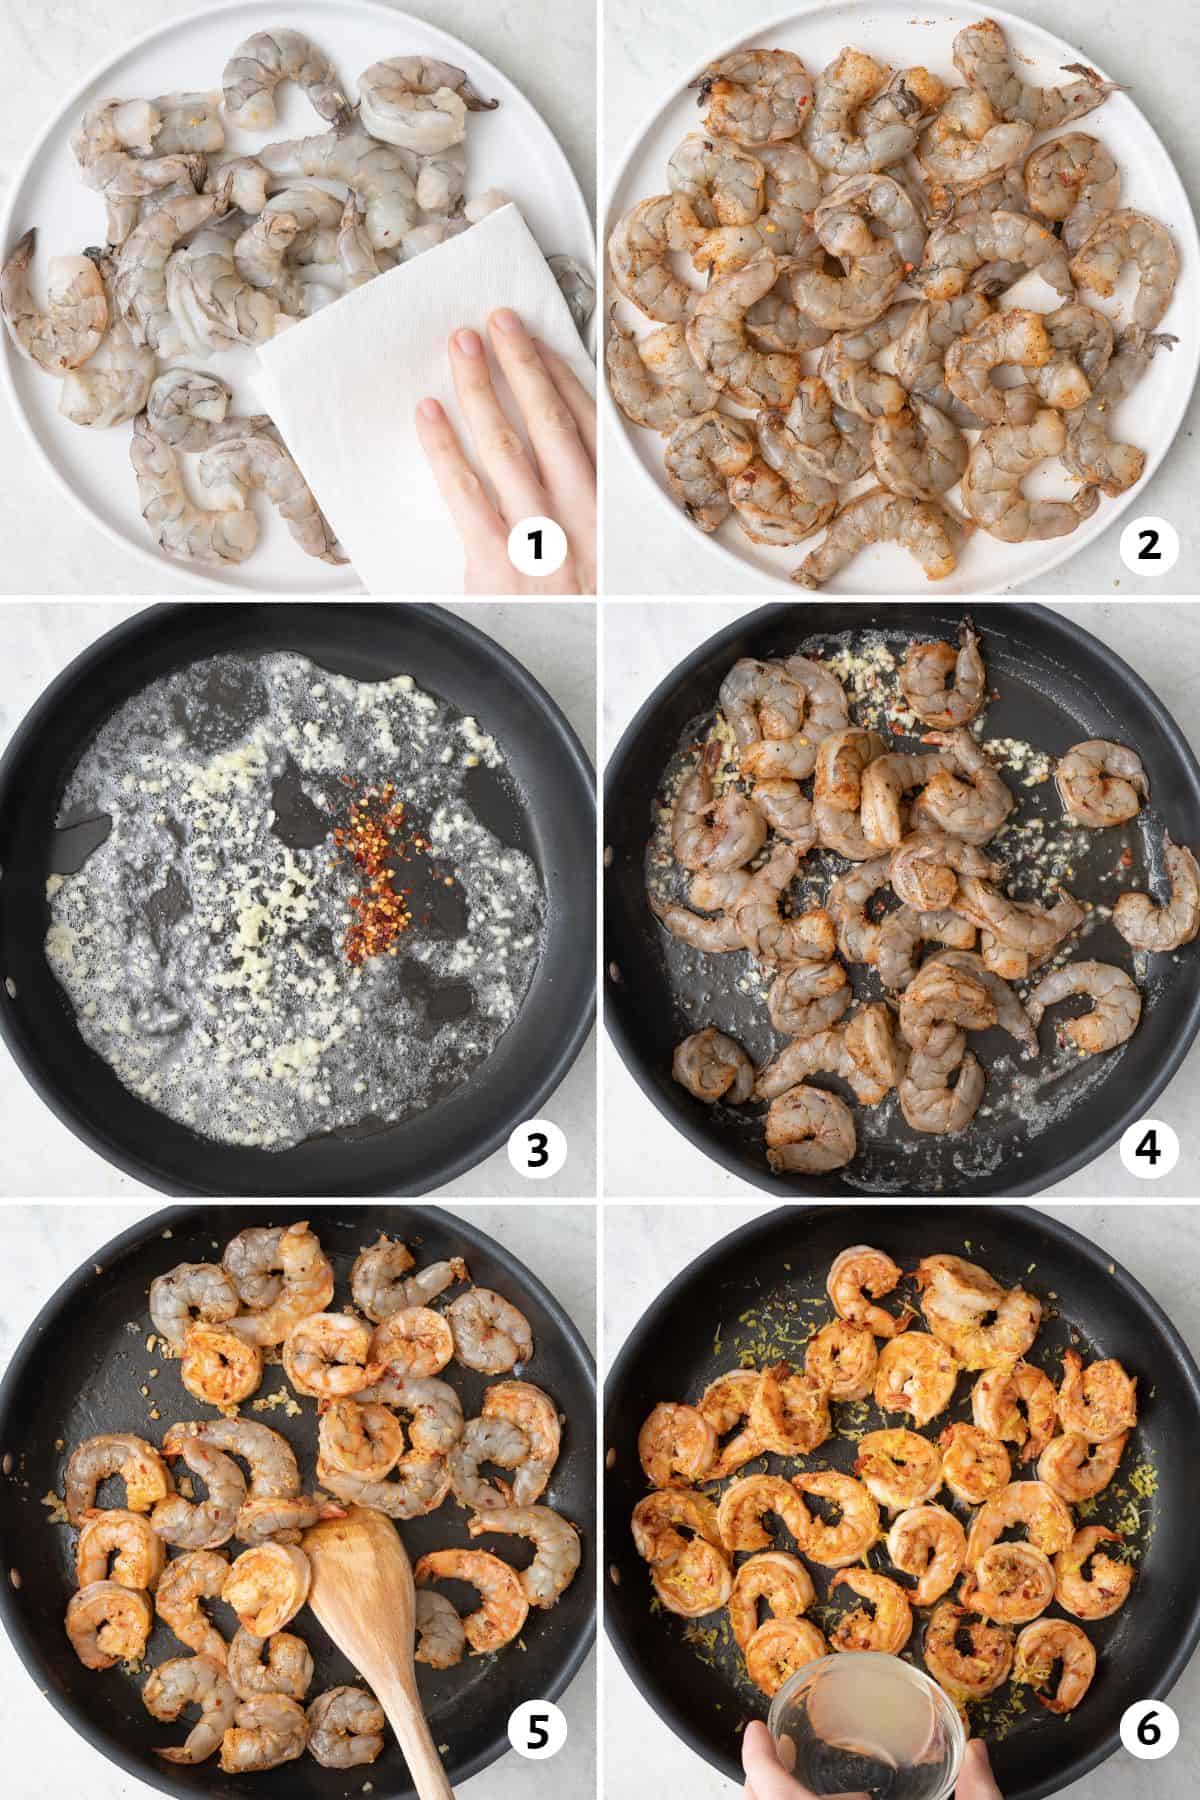 6 image collage making recipe in a pan: 1- patting shrimp dry with a paper towel, 2- shrimp on plate with seasoning, 3- large skillet with melted butter, garlic, and crushed red pepper added, 4- shrimp added before cooking, 5- wood spoon stirring partially cooked shrimp, 6- lemon zest and juice being added to pan.